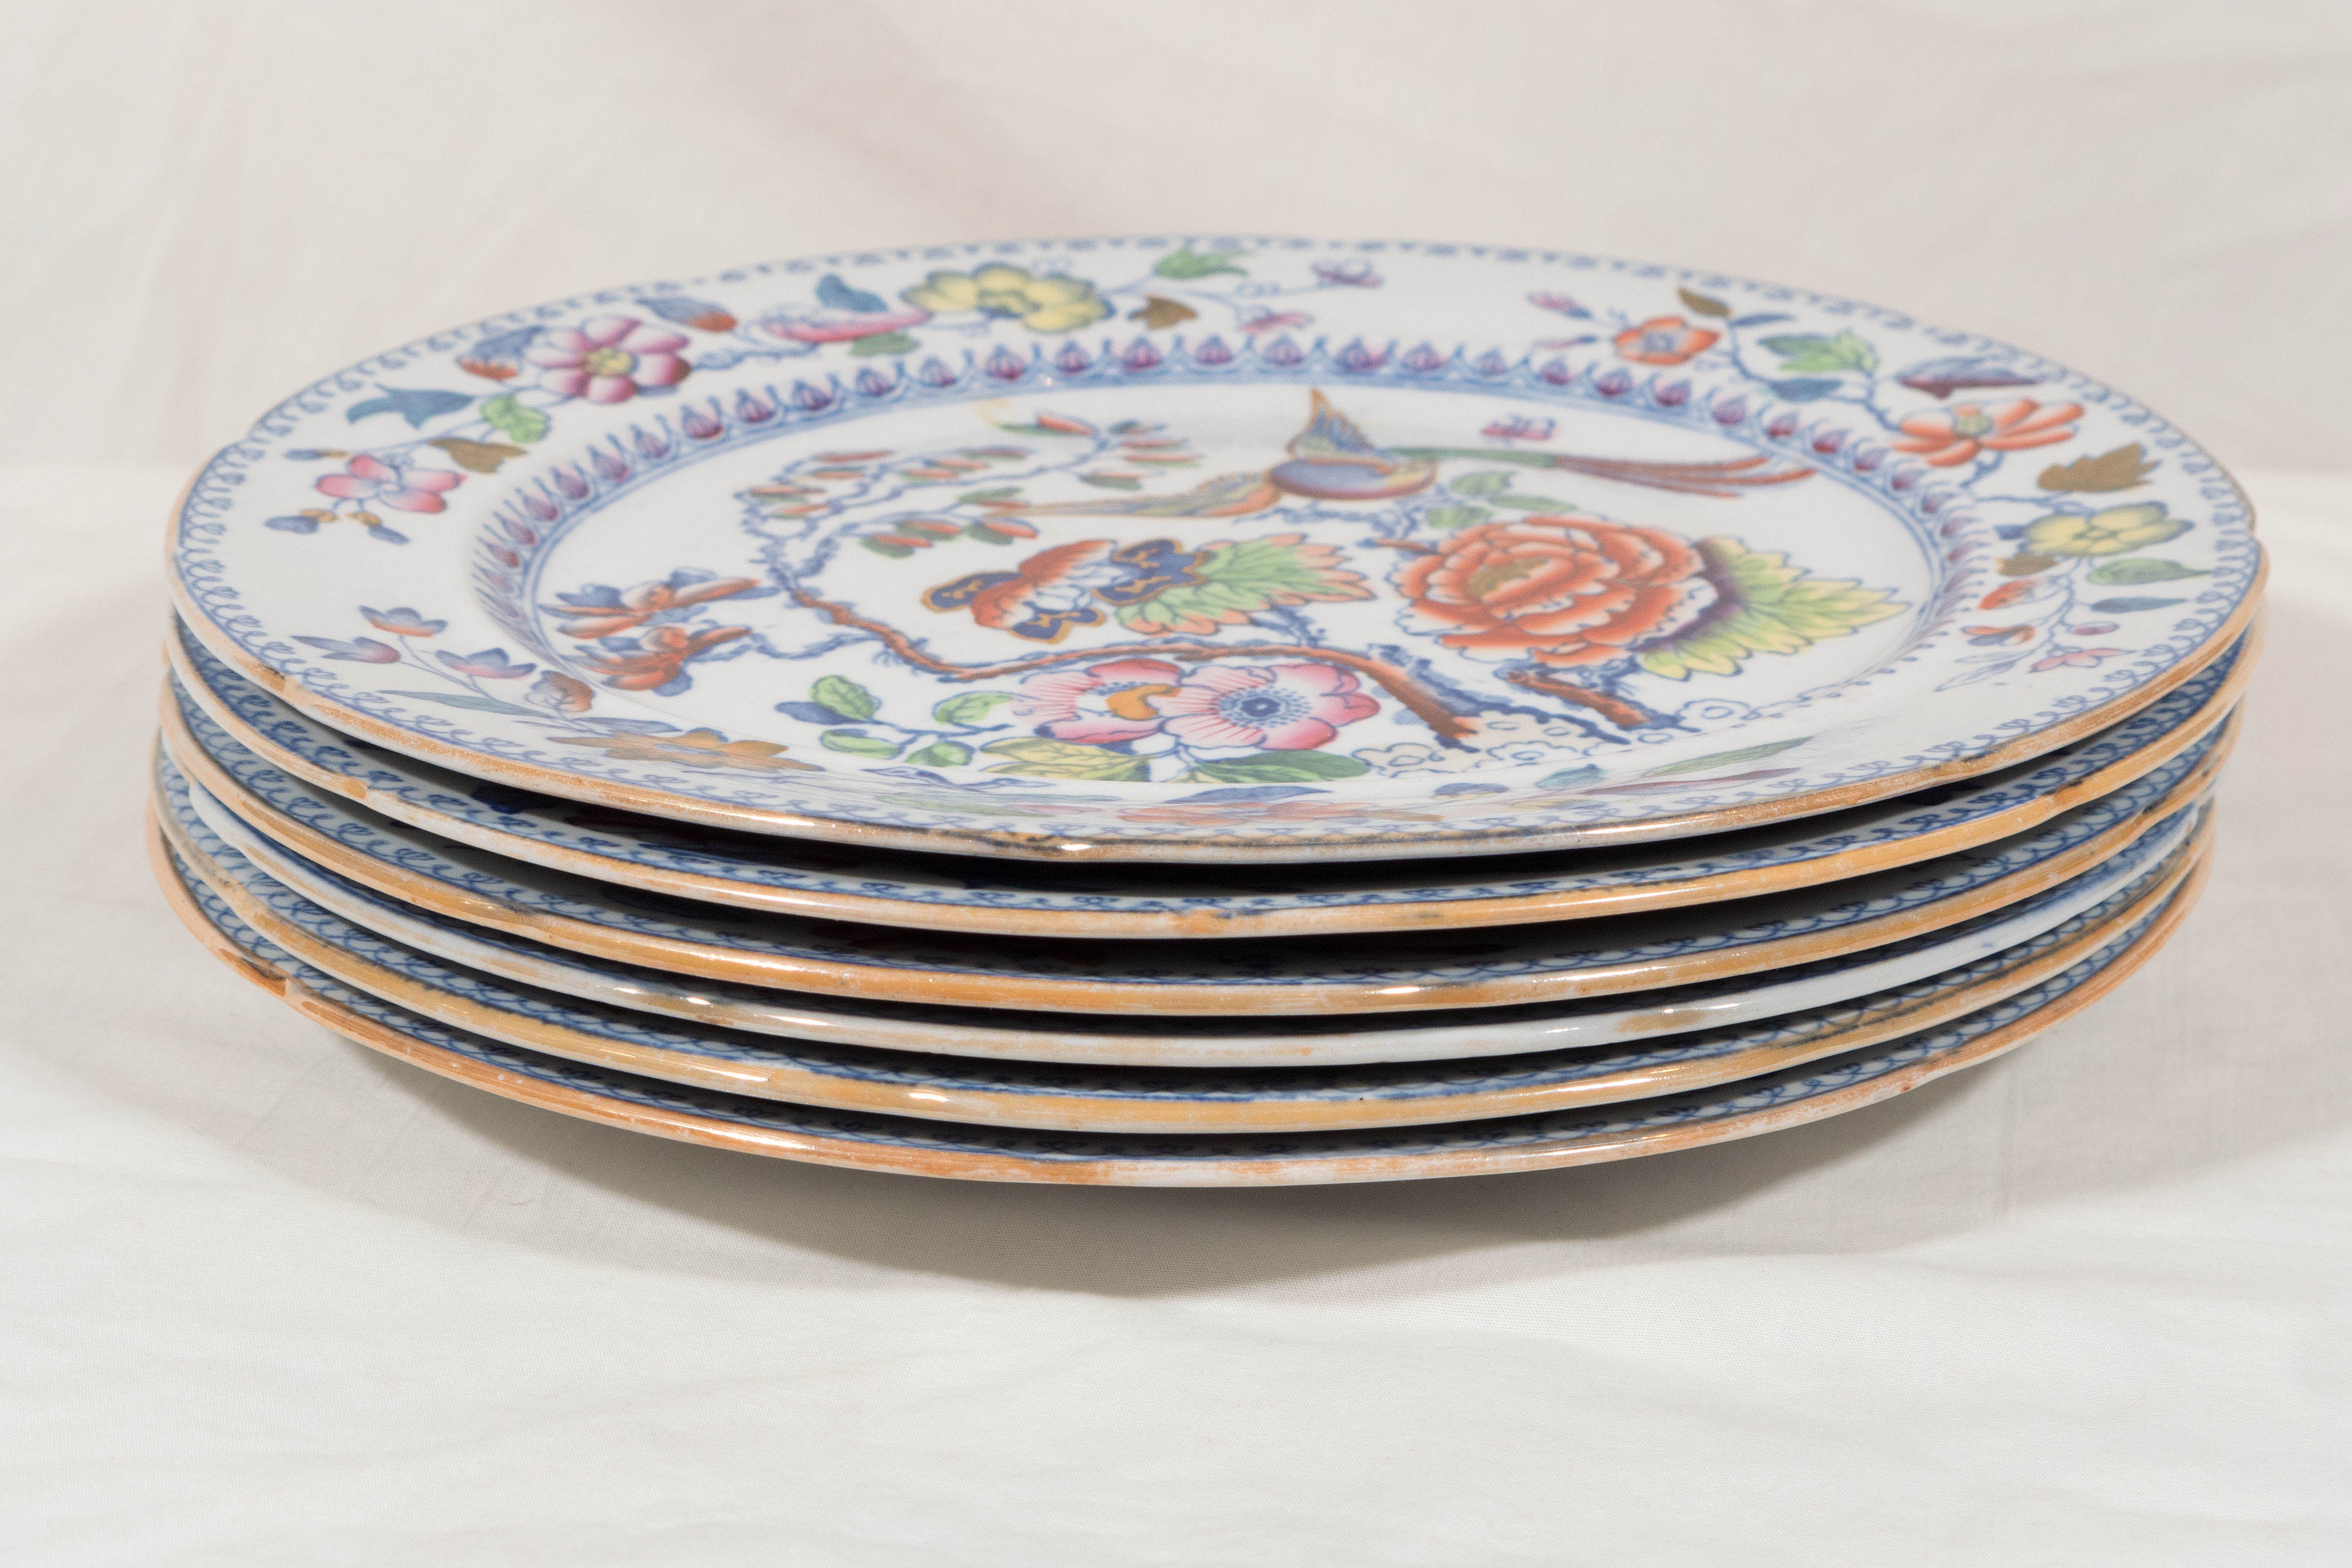 Set of 14 Mason's Ironstone Dinner Dishes in the 